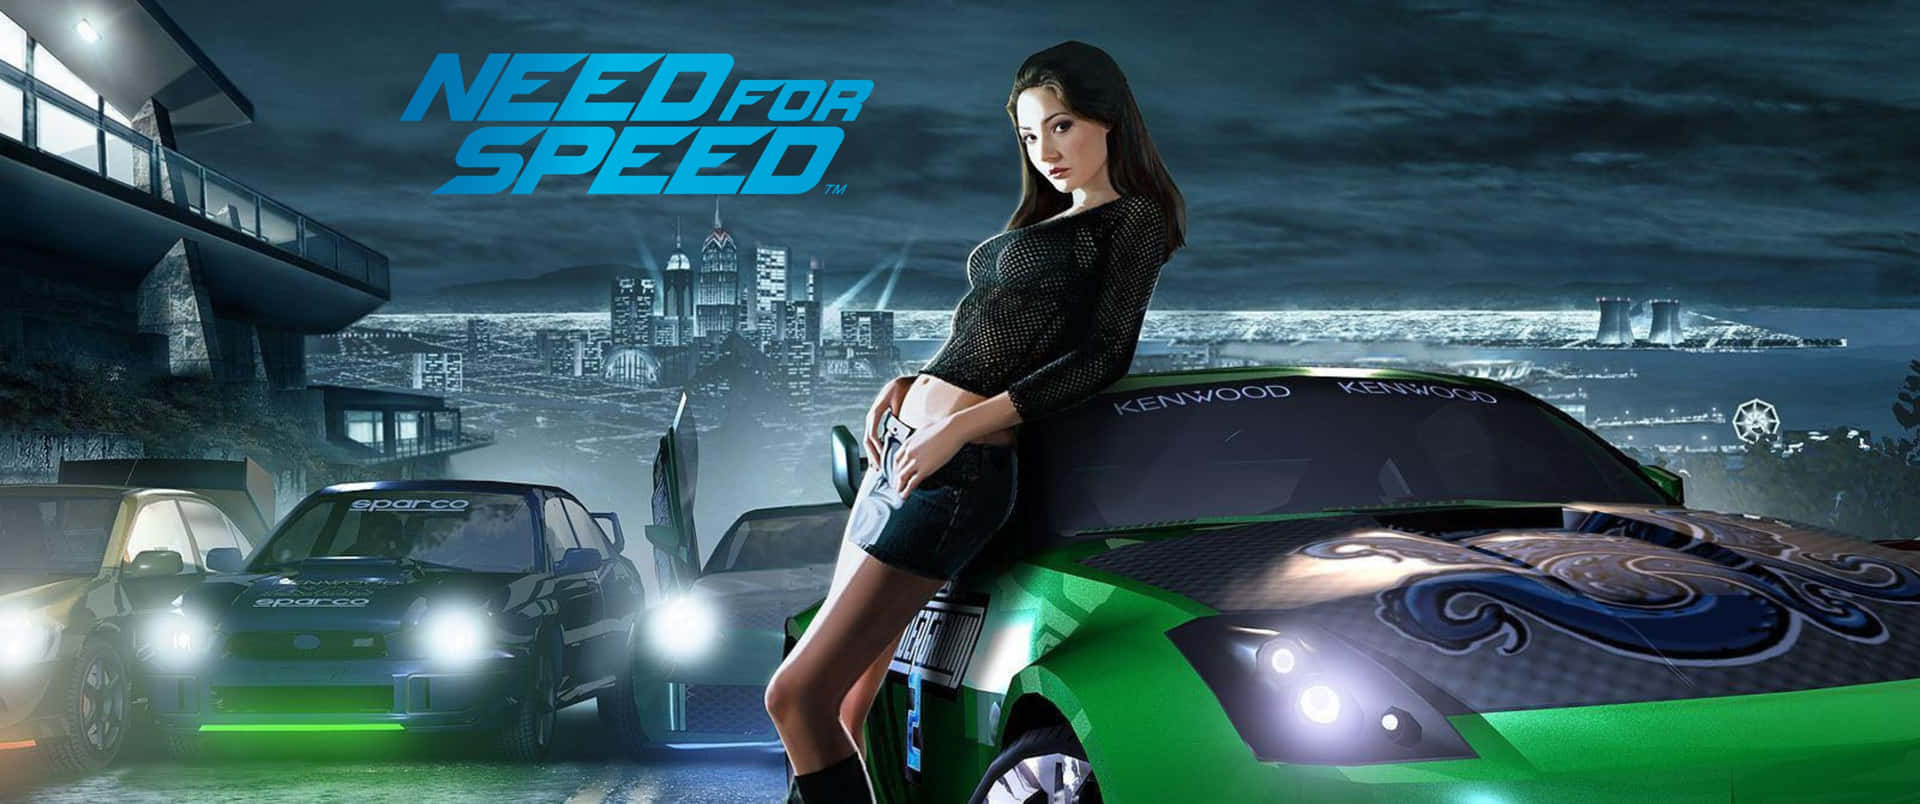 Need For Speed - A Woman Standing Next To A Car